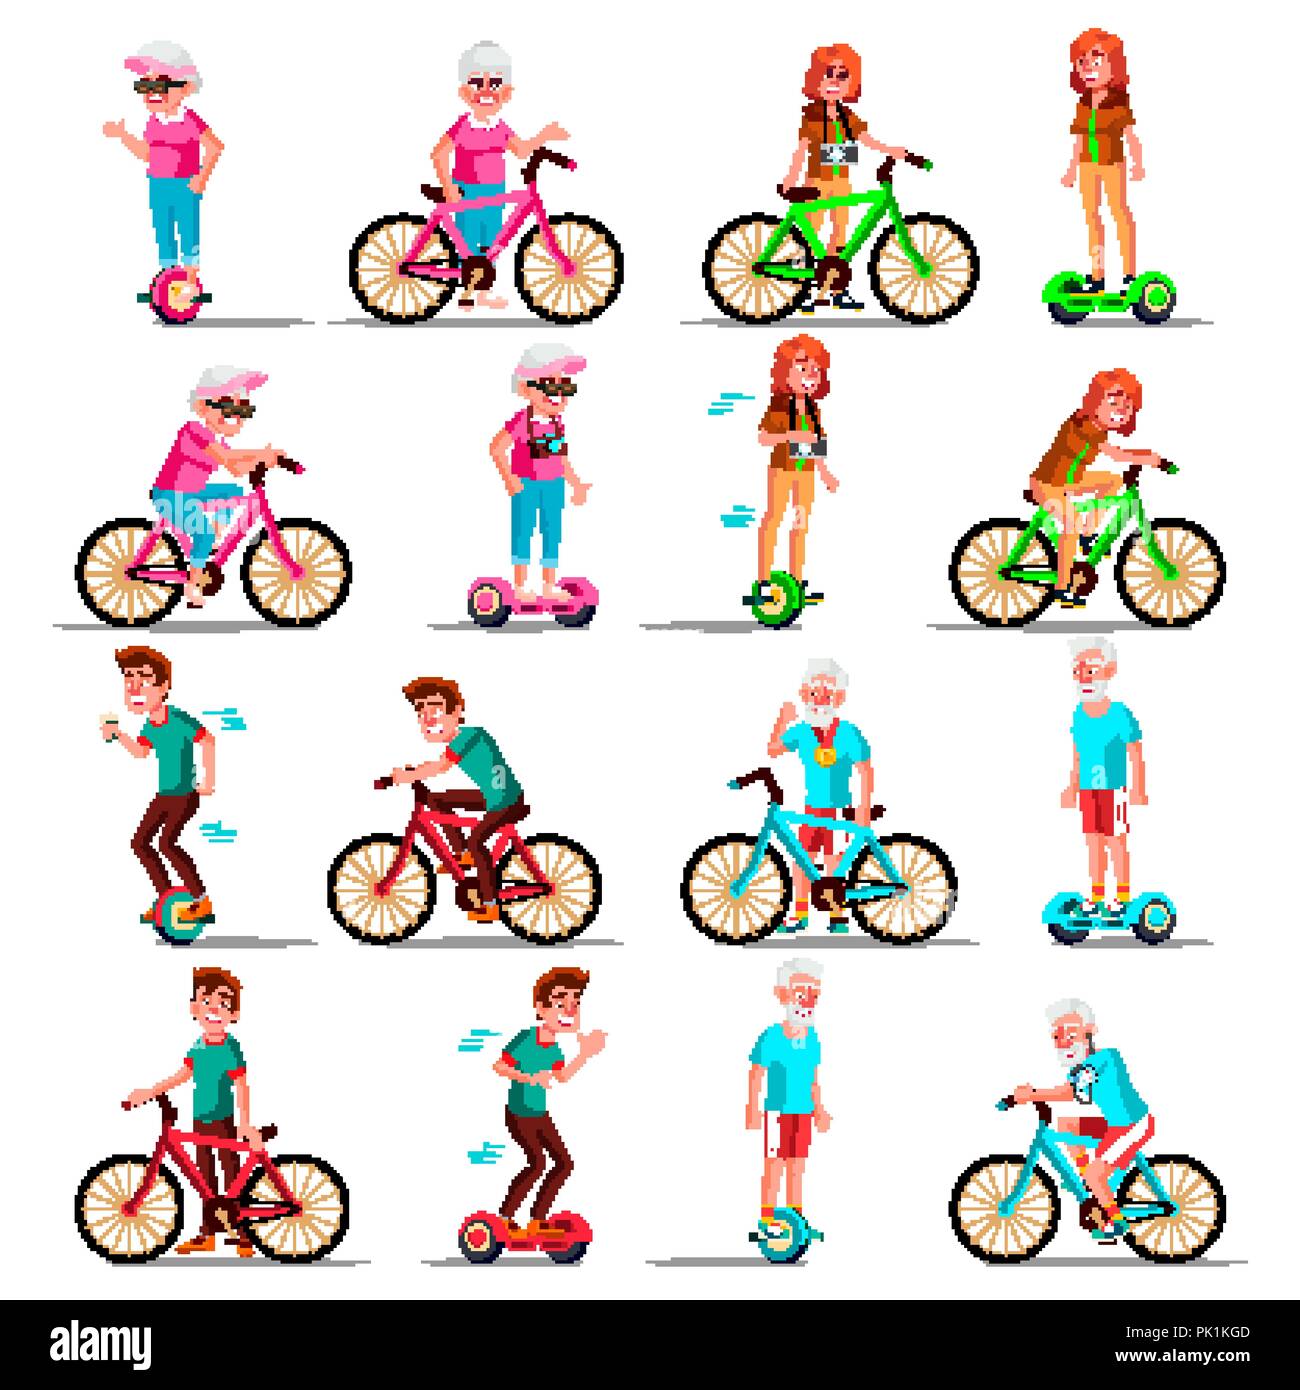 Download Boy Riding Bicycle Cartoon Illustration Cut Out Stock ...